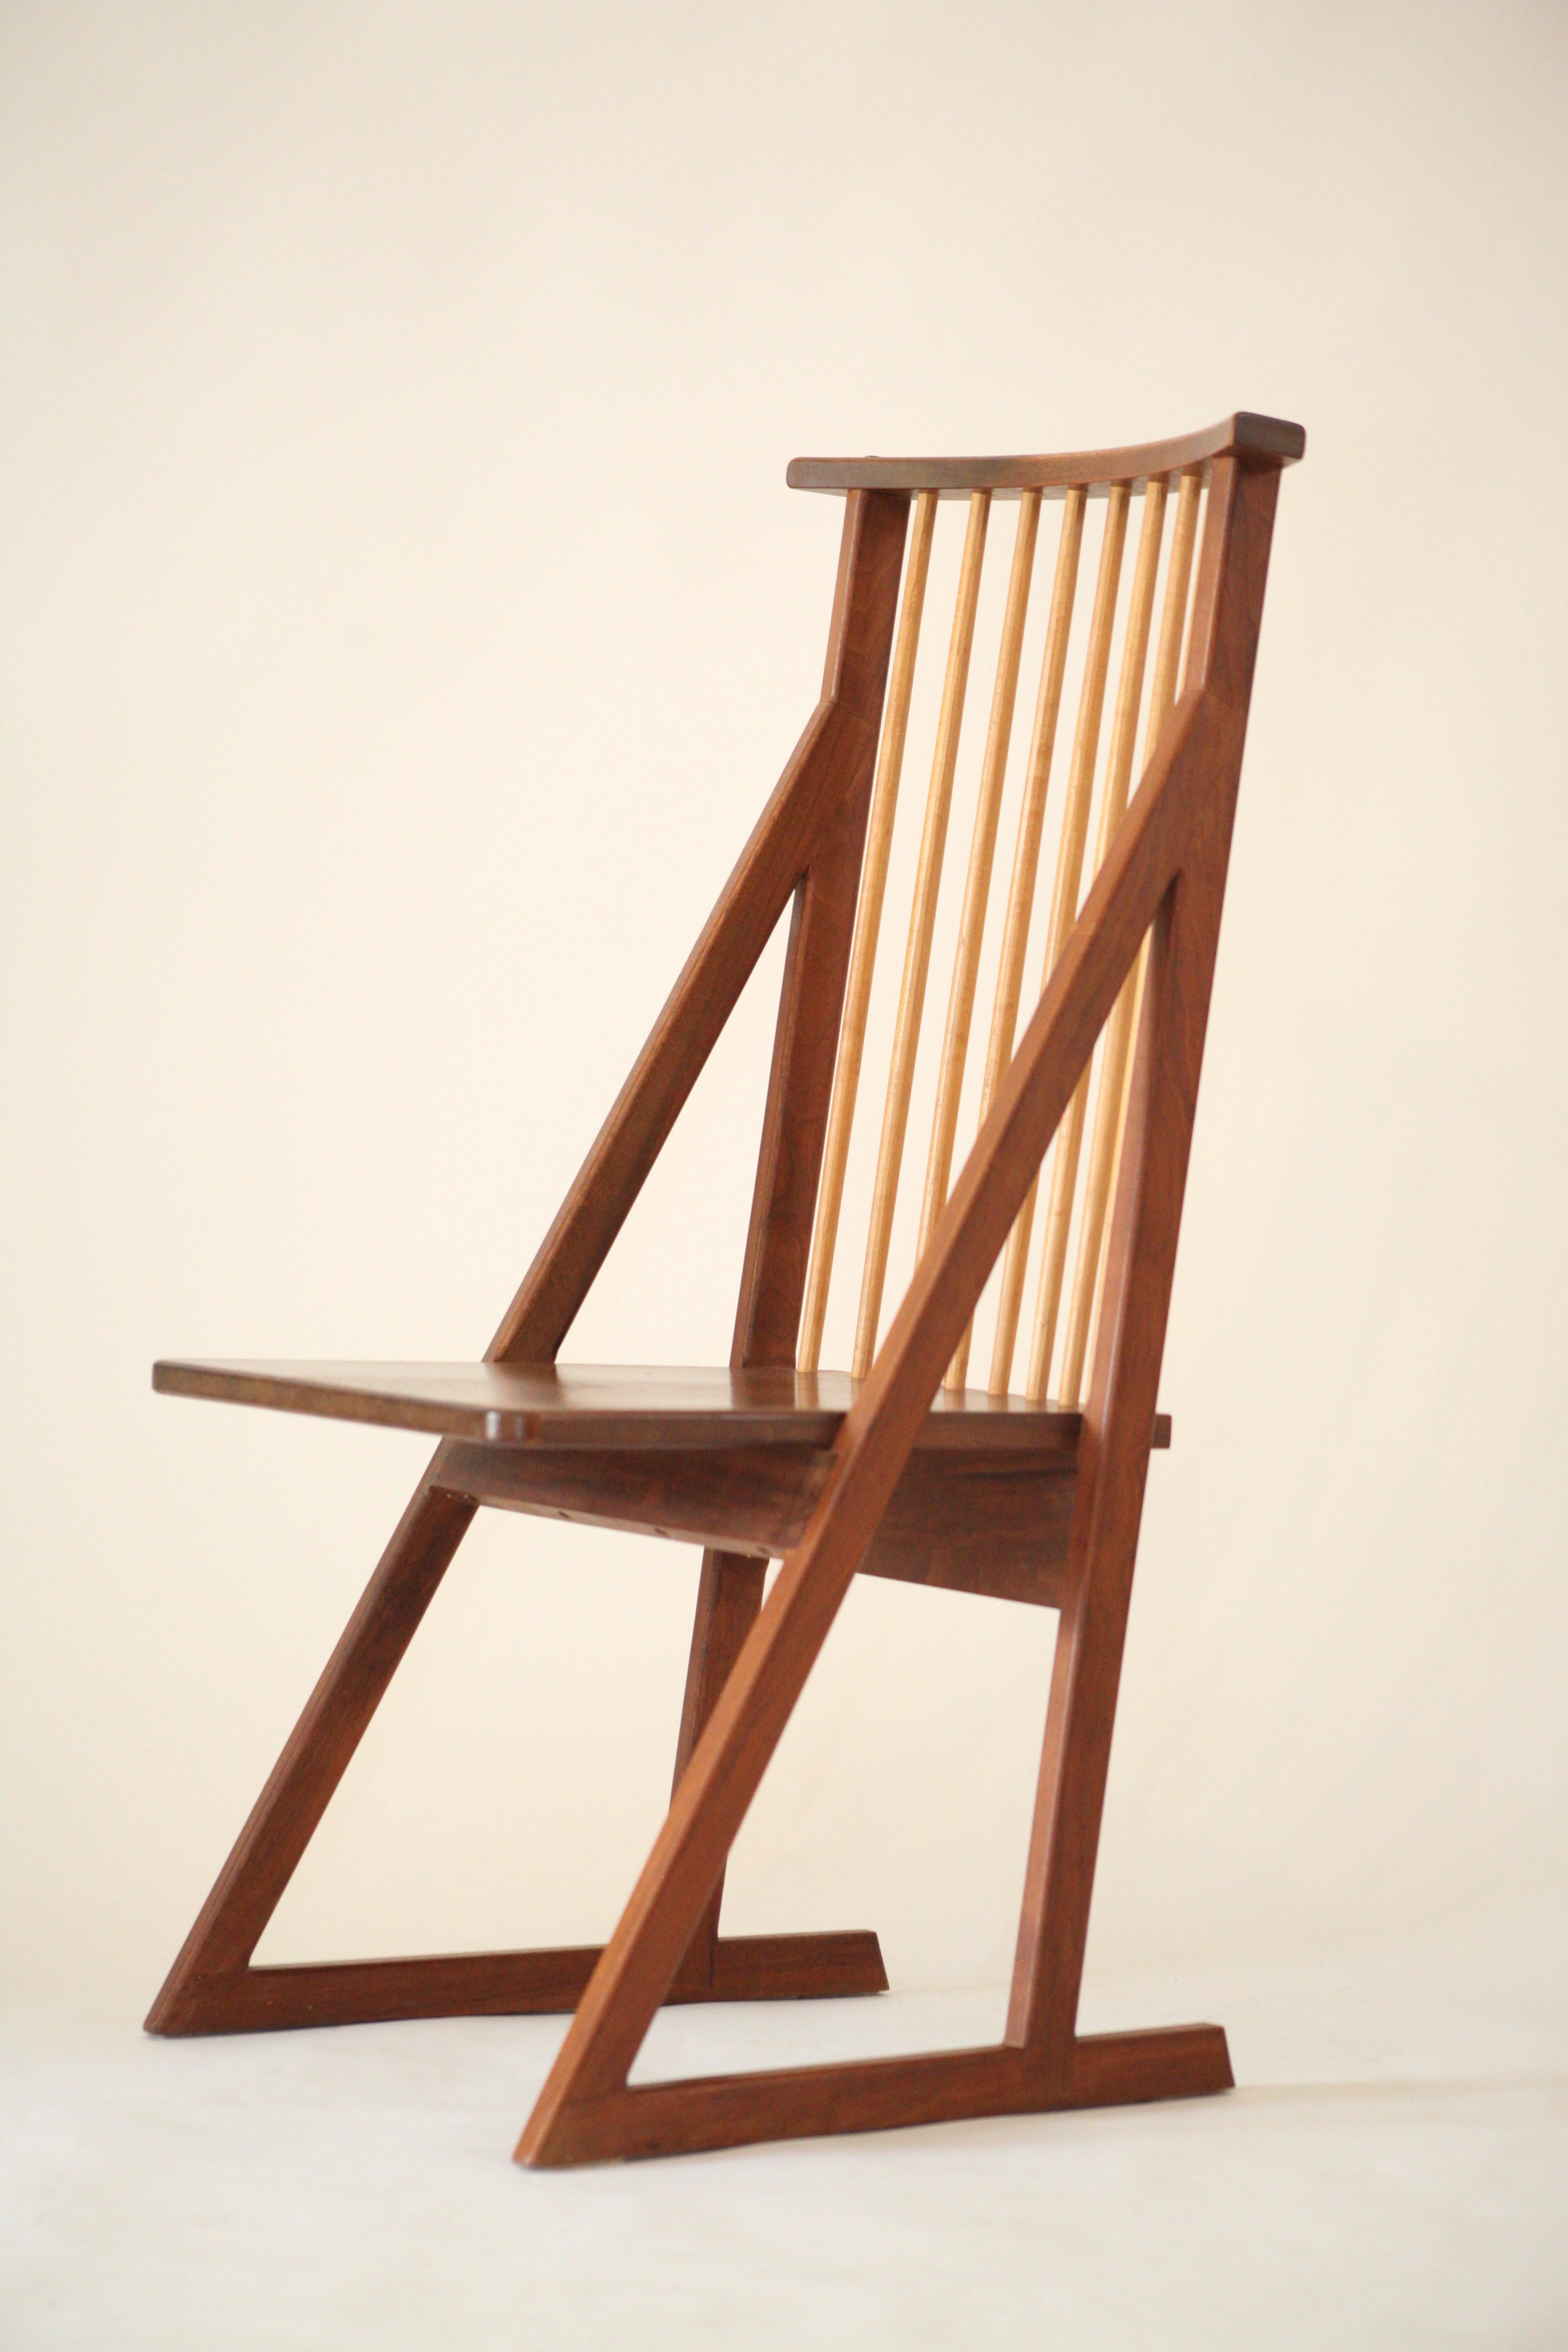 Tadao Arimoto Walnut Spindle Back Chair, 1980s im Zustand „Gut“ im Angebot in Pittsburgh, PA